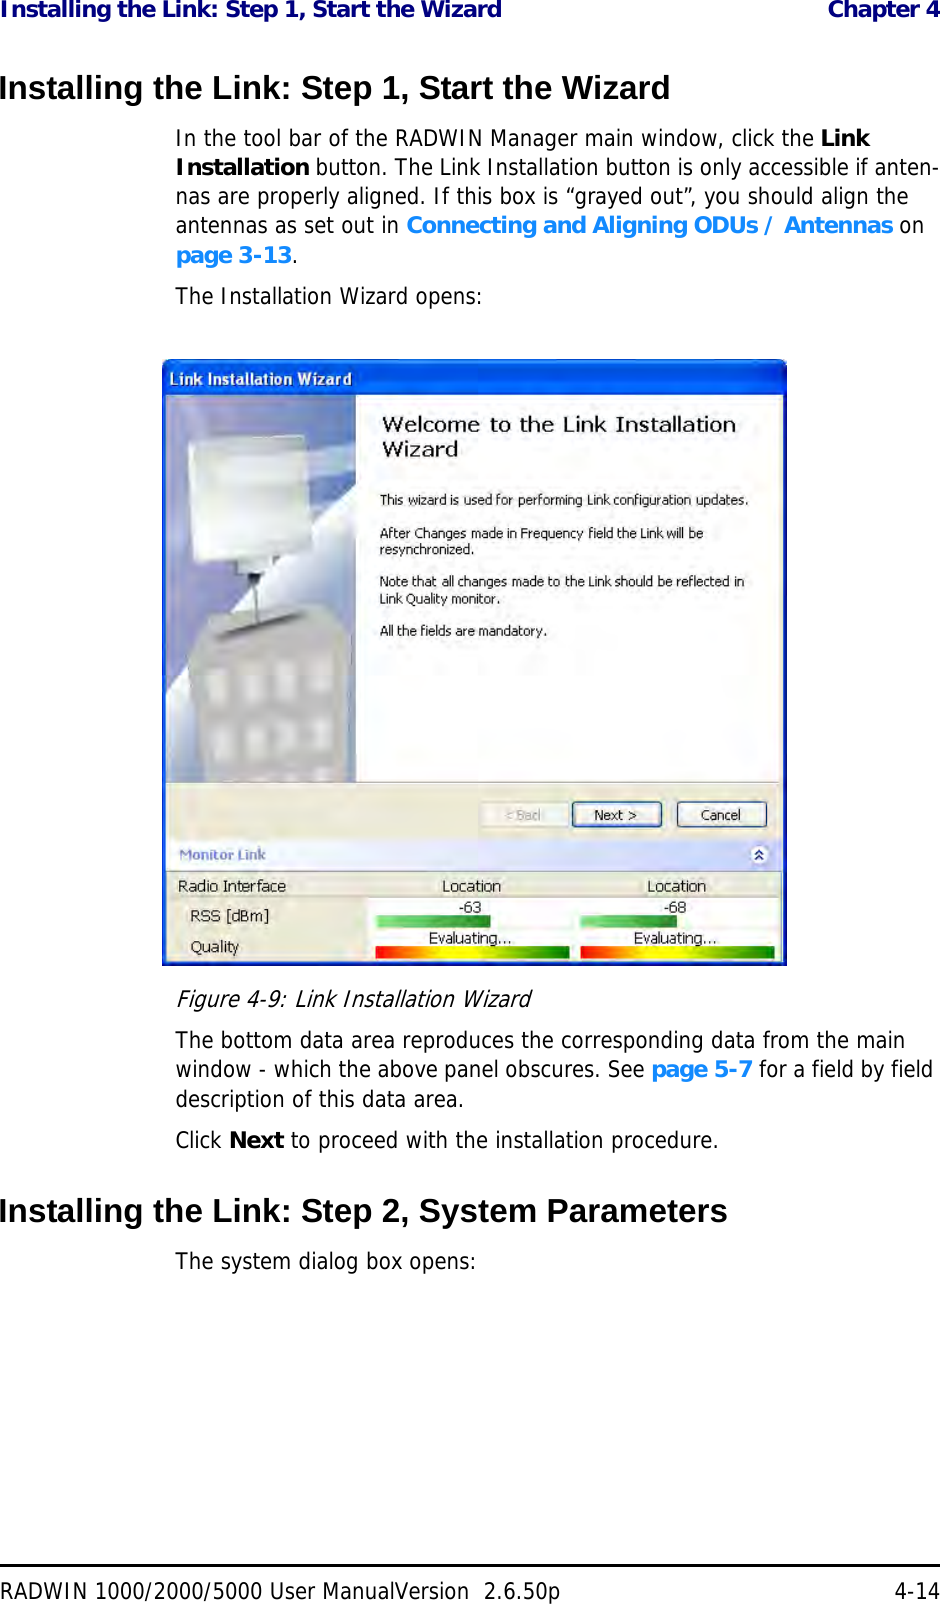 Installing the Link: Step 1, Start the Wizard  Chapter 4RADWIN 1000/2000/5000 User ManualVersion  2.6.50p 4-14Installing the Link: Step 1, Start the WizardIn the tool bar of the RADWIN Manager main window, click the Link Installation button. The Link Installation button is only accessible if anten-nas are properly aligned. If this box is “grayed out”, you should align the antennas as set out in Connecting and Aligning ODUs / Antennas on page 3-13.The Installation Wizard opens:Figure 4-9: Link Installation WizardThe bottom data area reproduces the corresponding data from the main window - which the above panel obscures. See page 5-7 for a field by field description of this data area.Click Next to proceed with the installation procedure.Installing the Link: Step 2, System ParametersThe system dialog box opens: